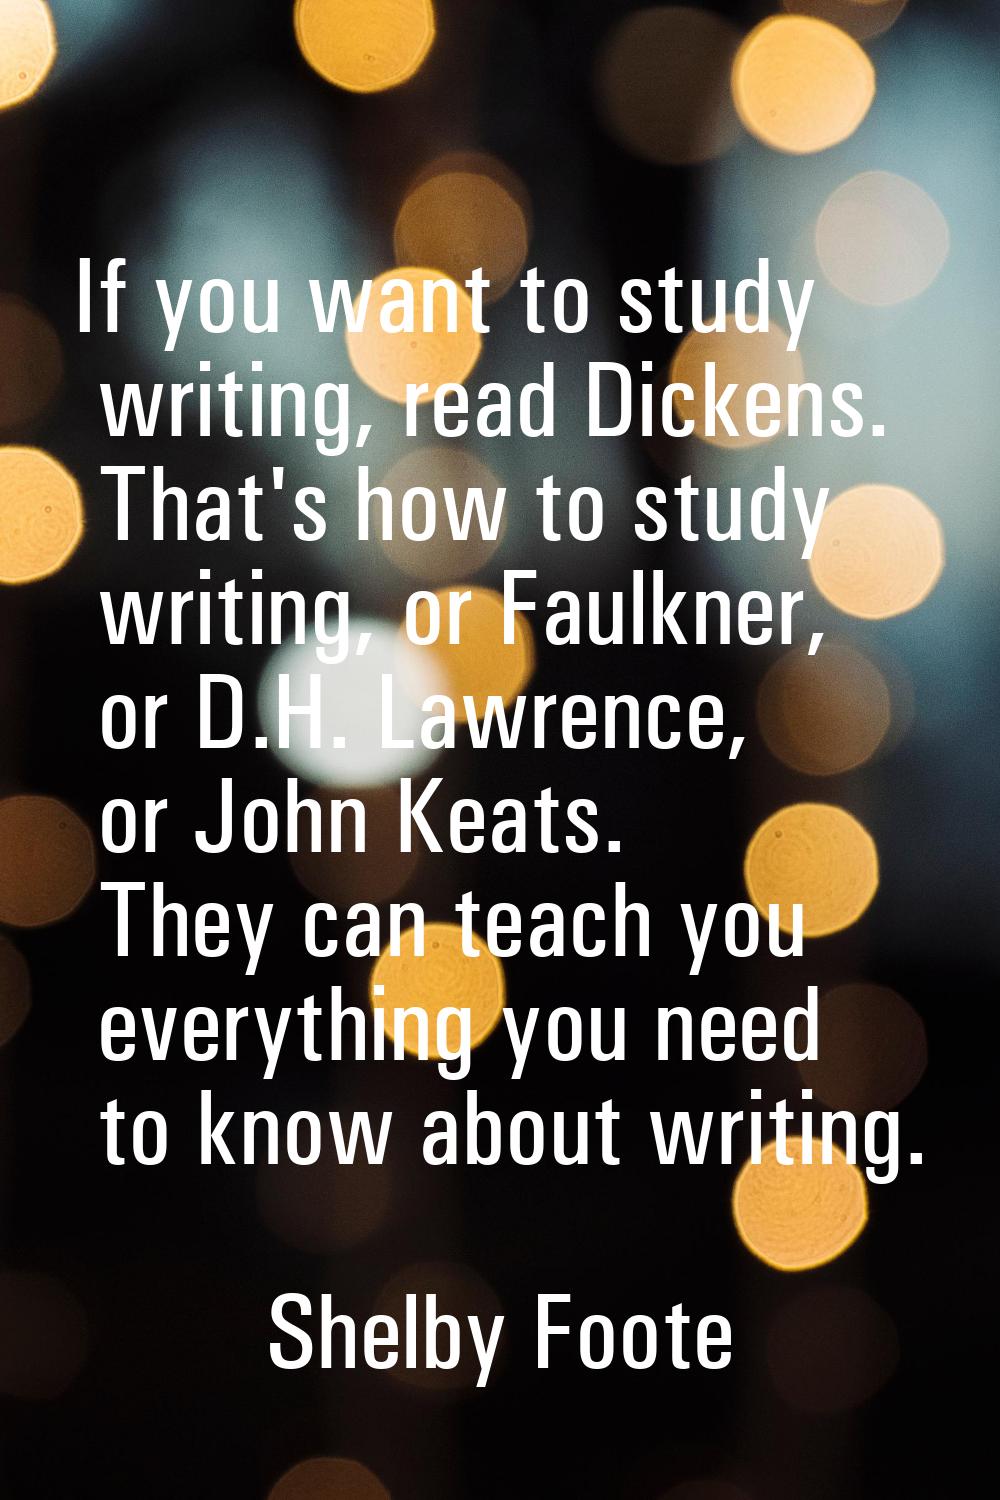 If you want to study writing, read Dickens. That's how to study writing, or Faulkner, or D.H. Lawre